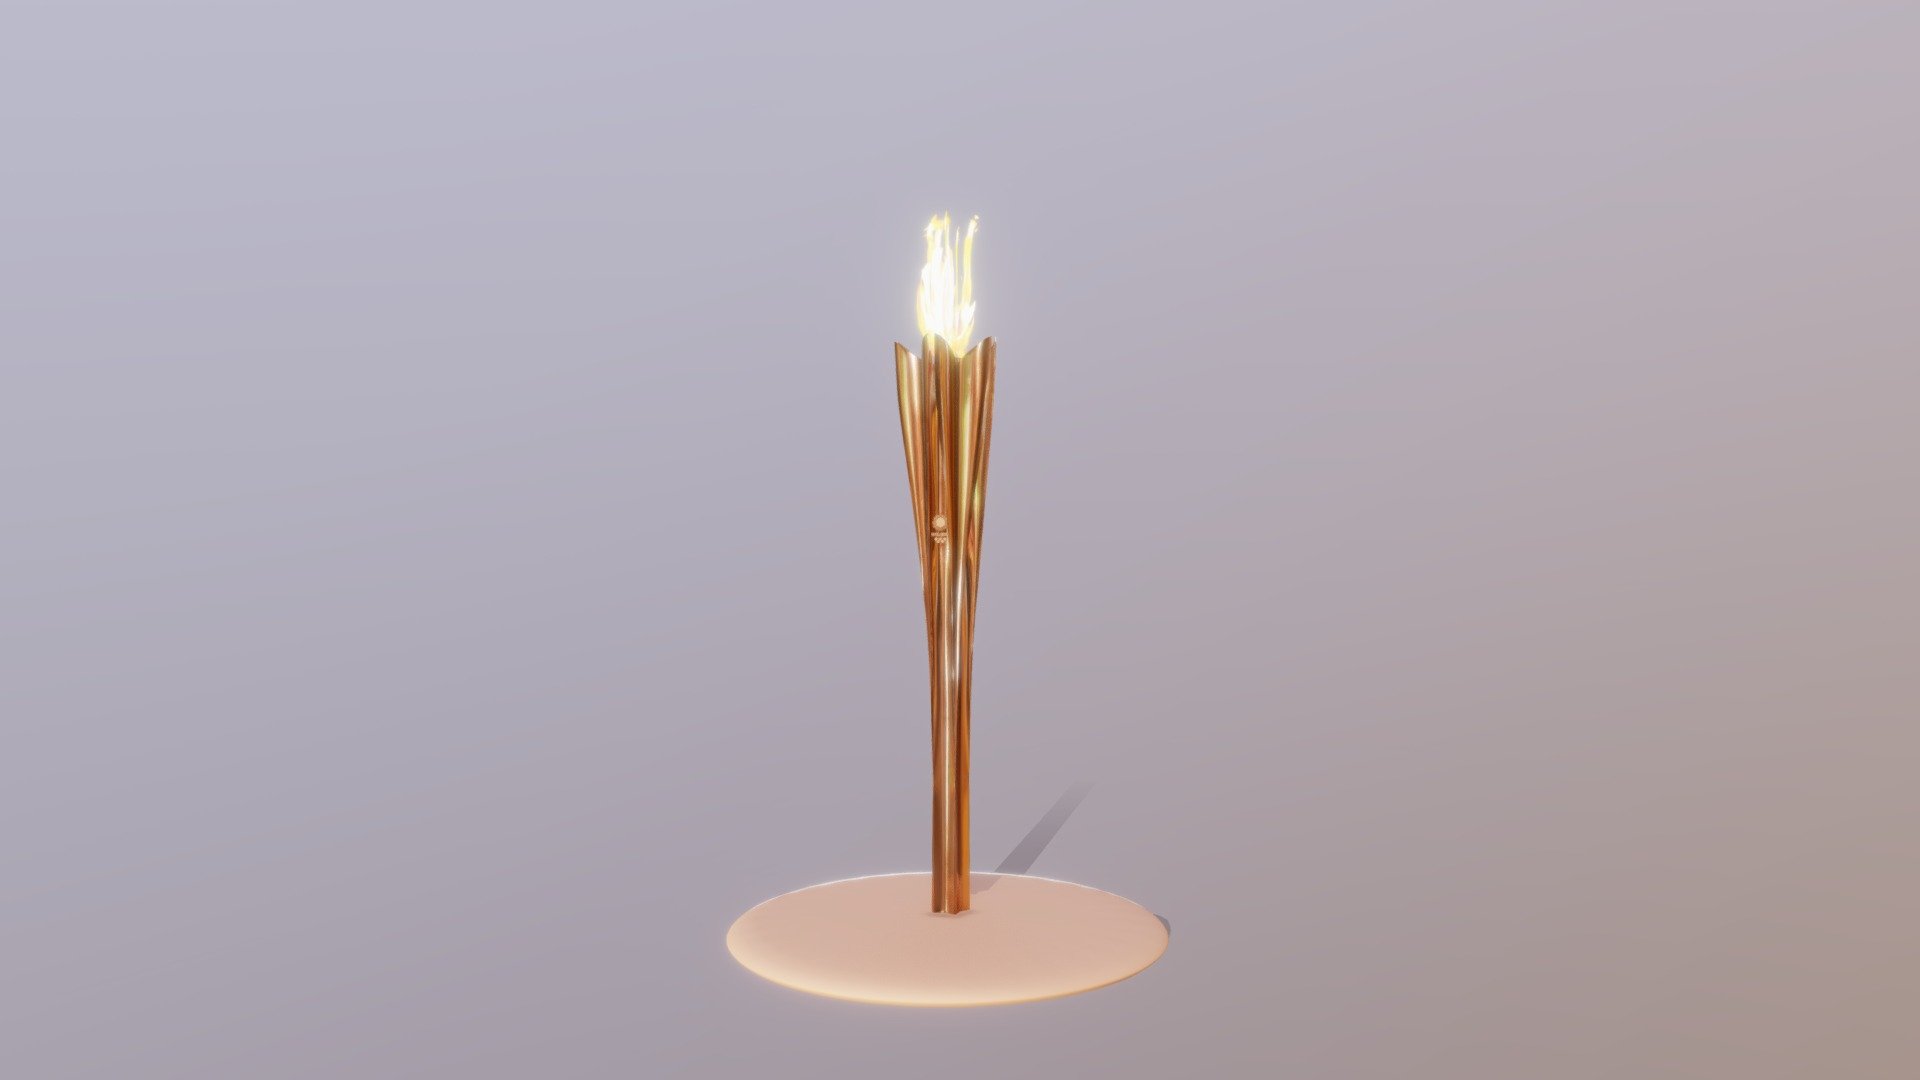 Tokyo 2020 Olympic Games it's here!
To celebrate and commemorate the Opening Ceremony and its message of union, solidarity, and peace, I have recreated the awesome design of the Olympic Torch..

If you want to download it, search on CGTrader with the title's name: &ldquo;Olympic Torch - Tokyo 2020